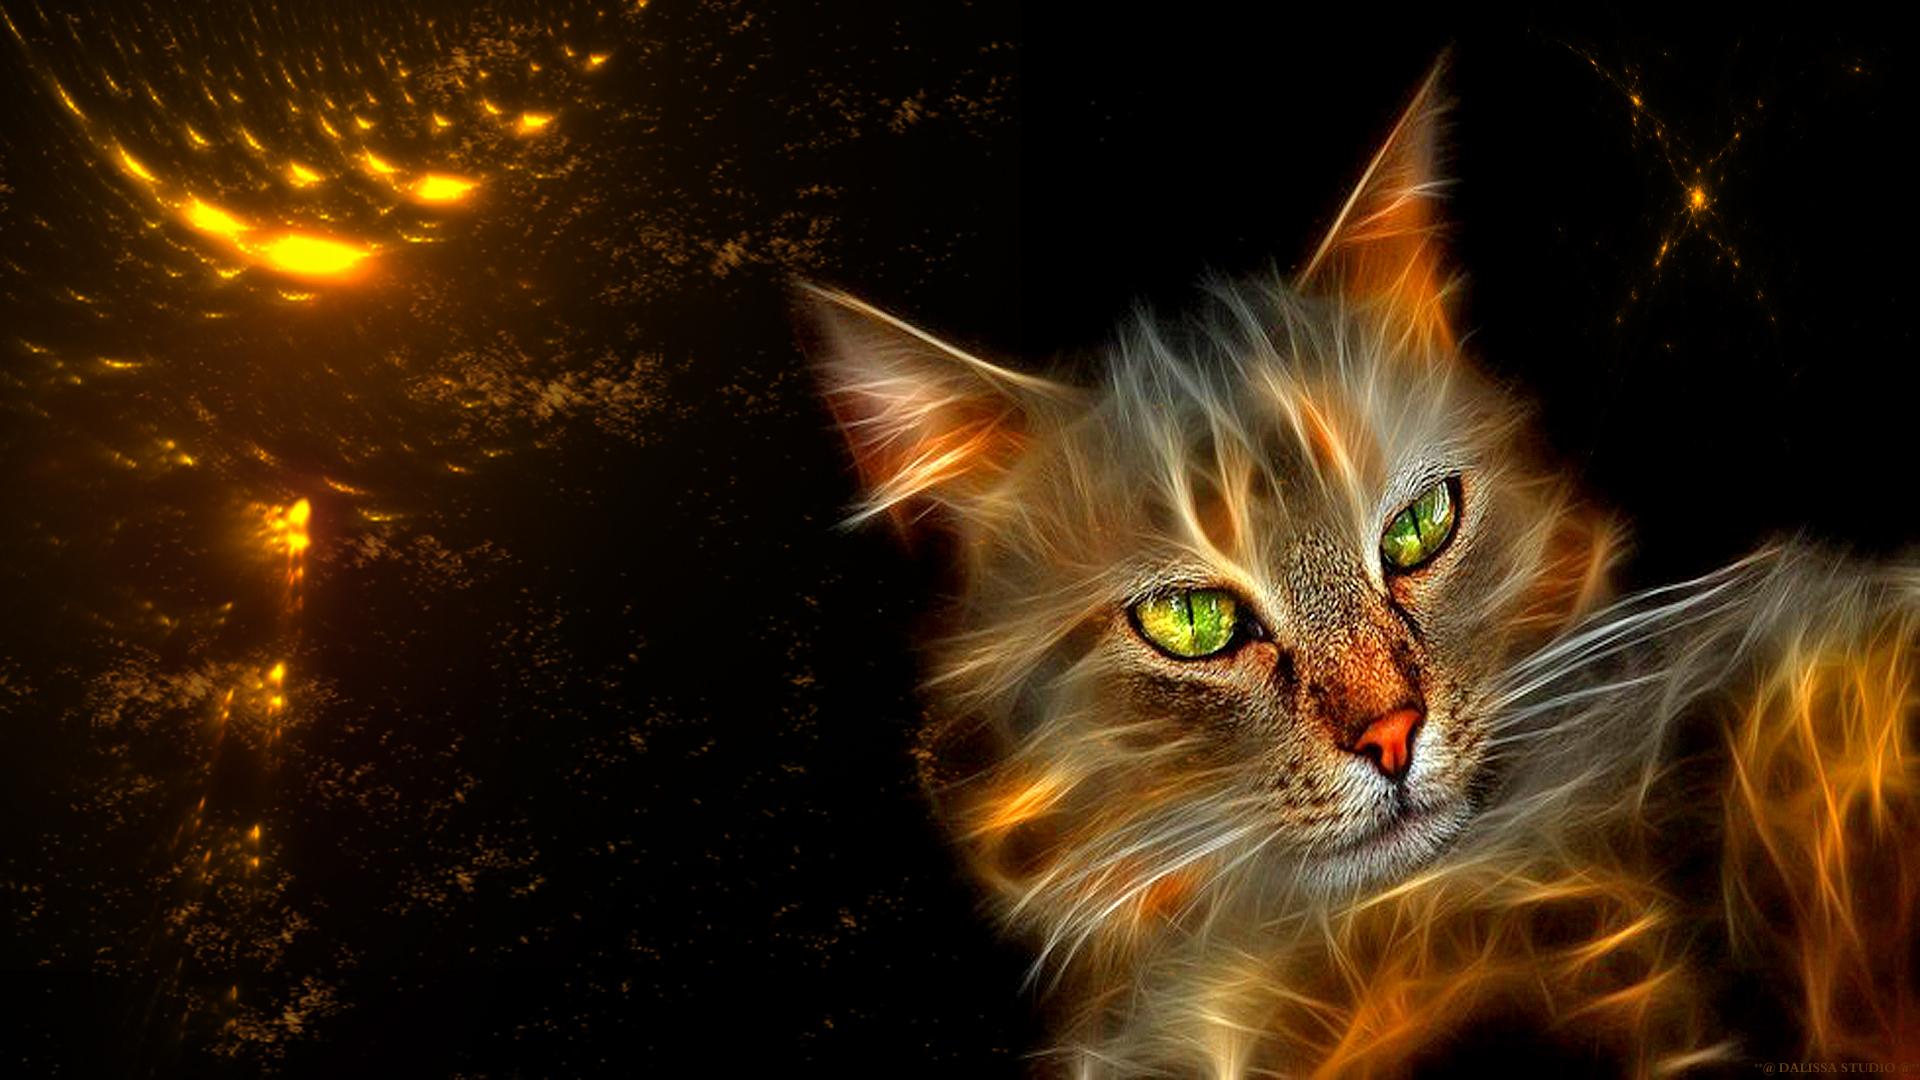 Download Flaming Cat Wallpaper HQ Picture #s202jf - Download Page ...